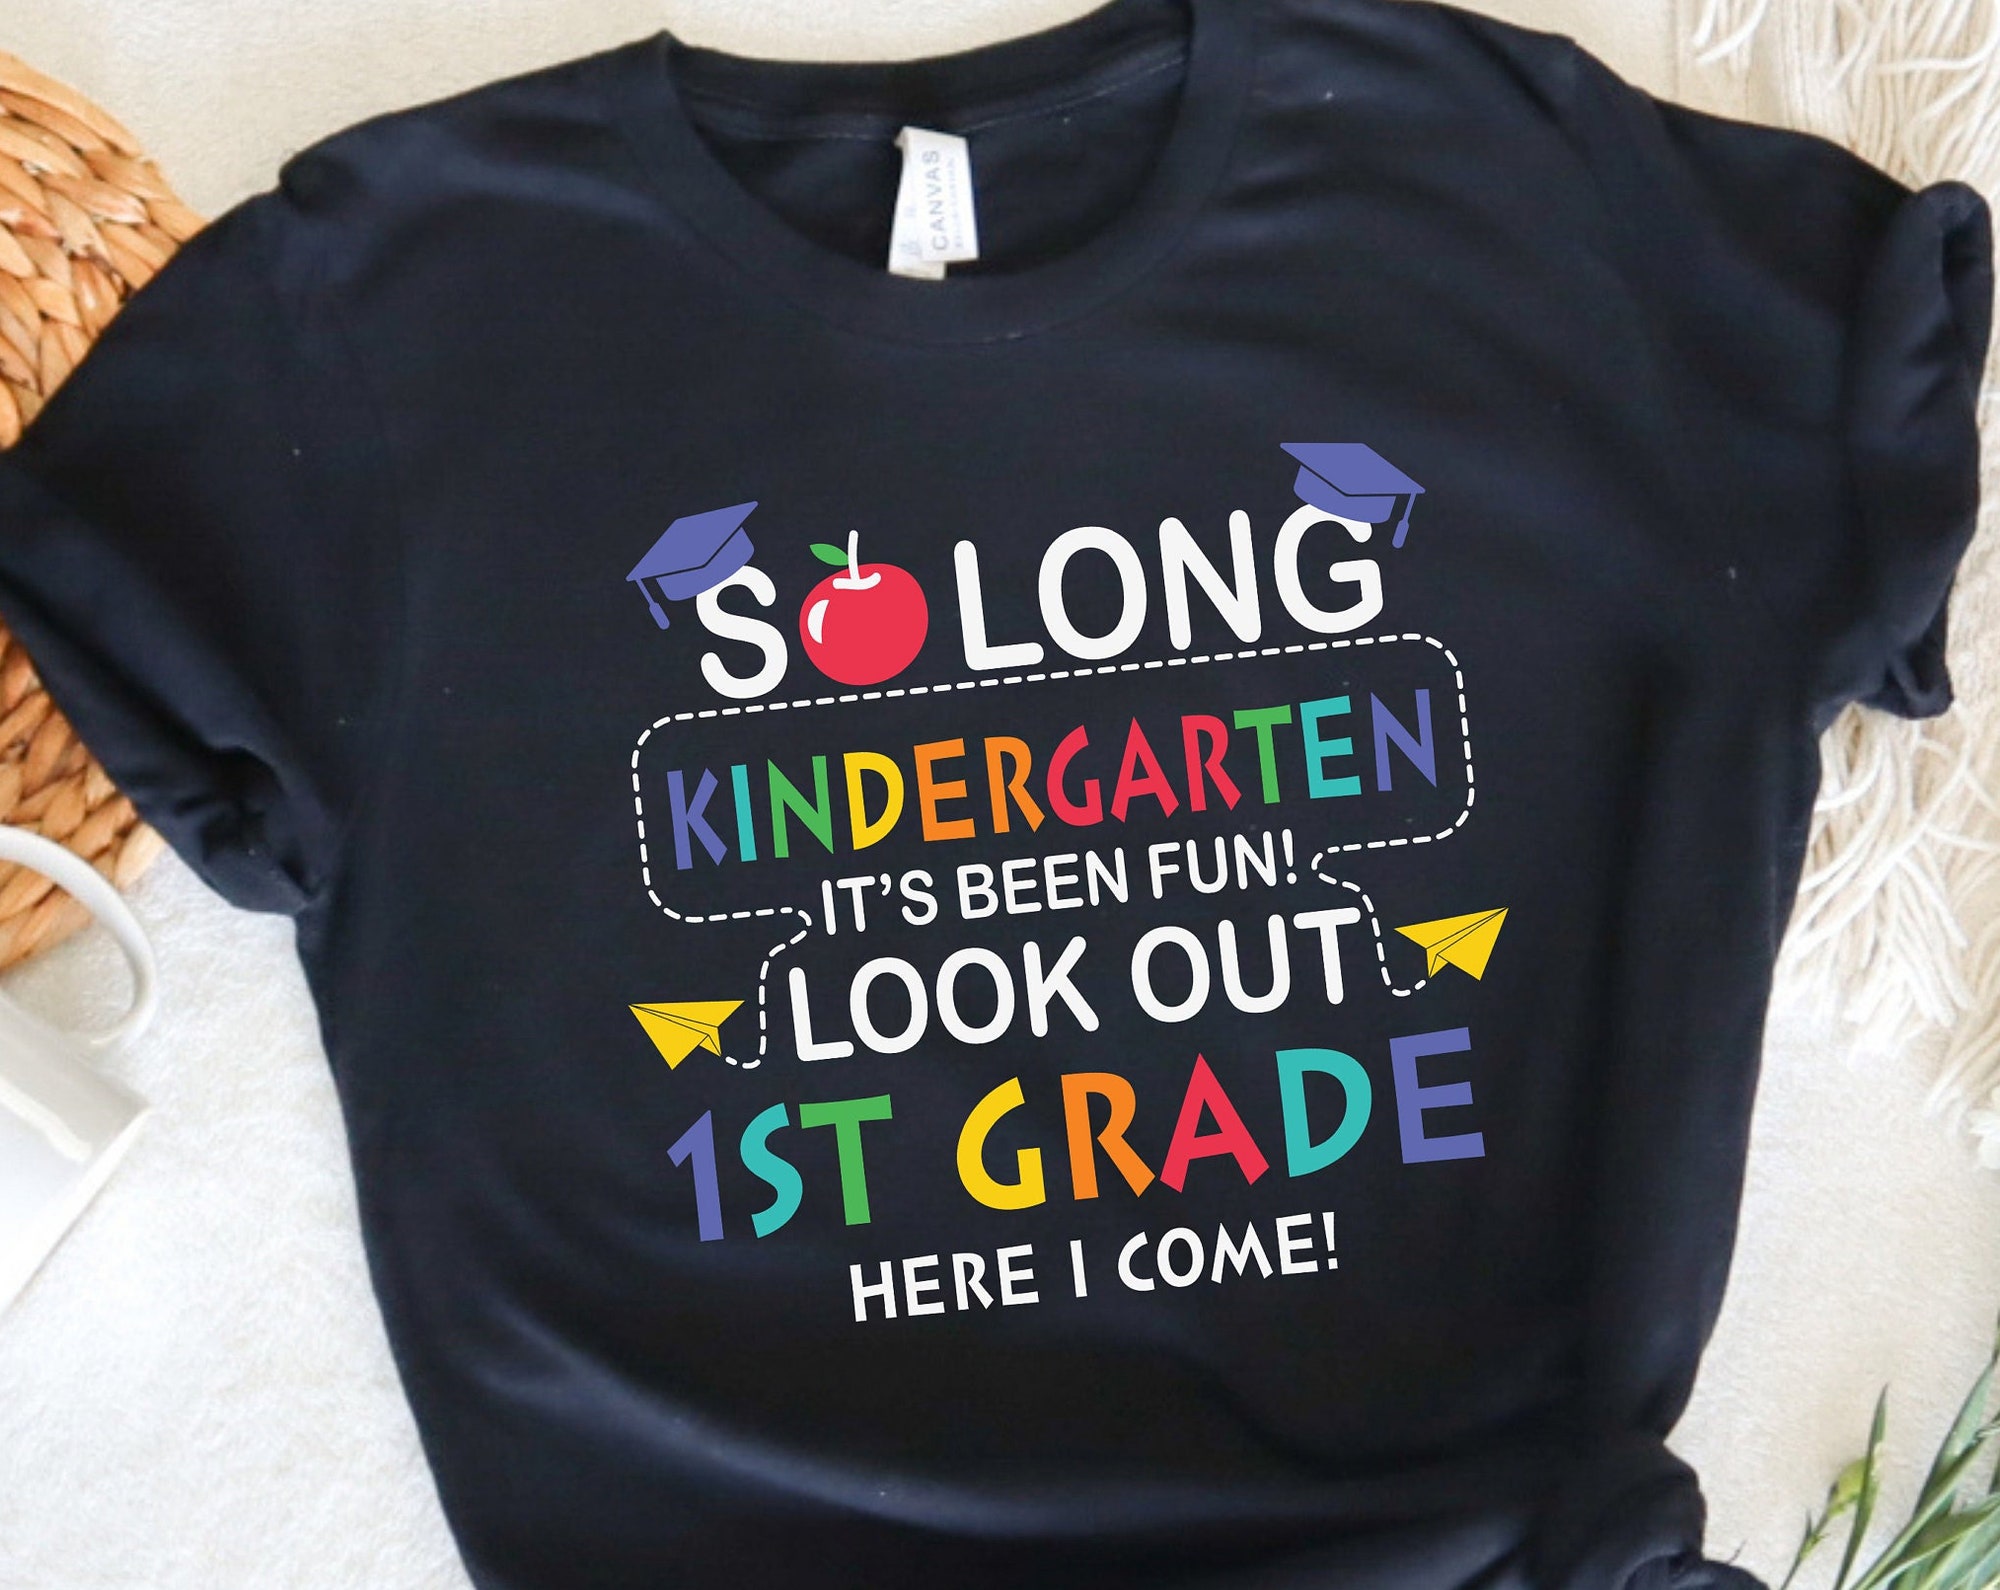 So Long Kindergarten It's Been Fun!Look Out First Grade Here I Come Shirt